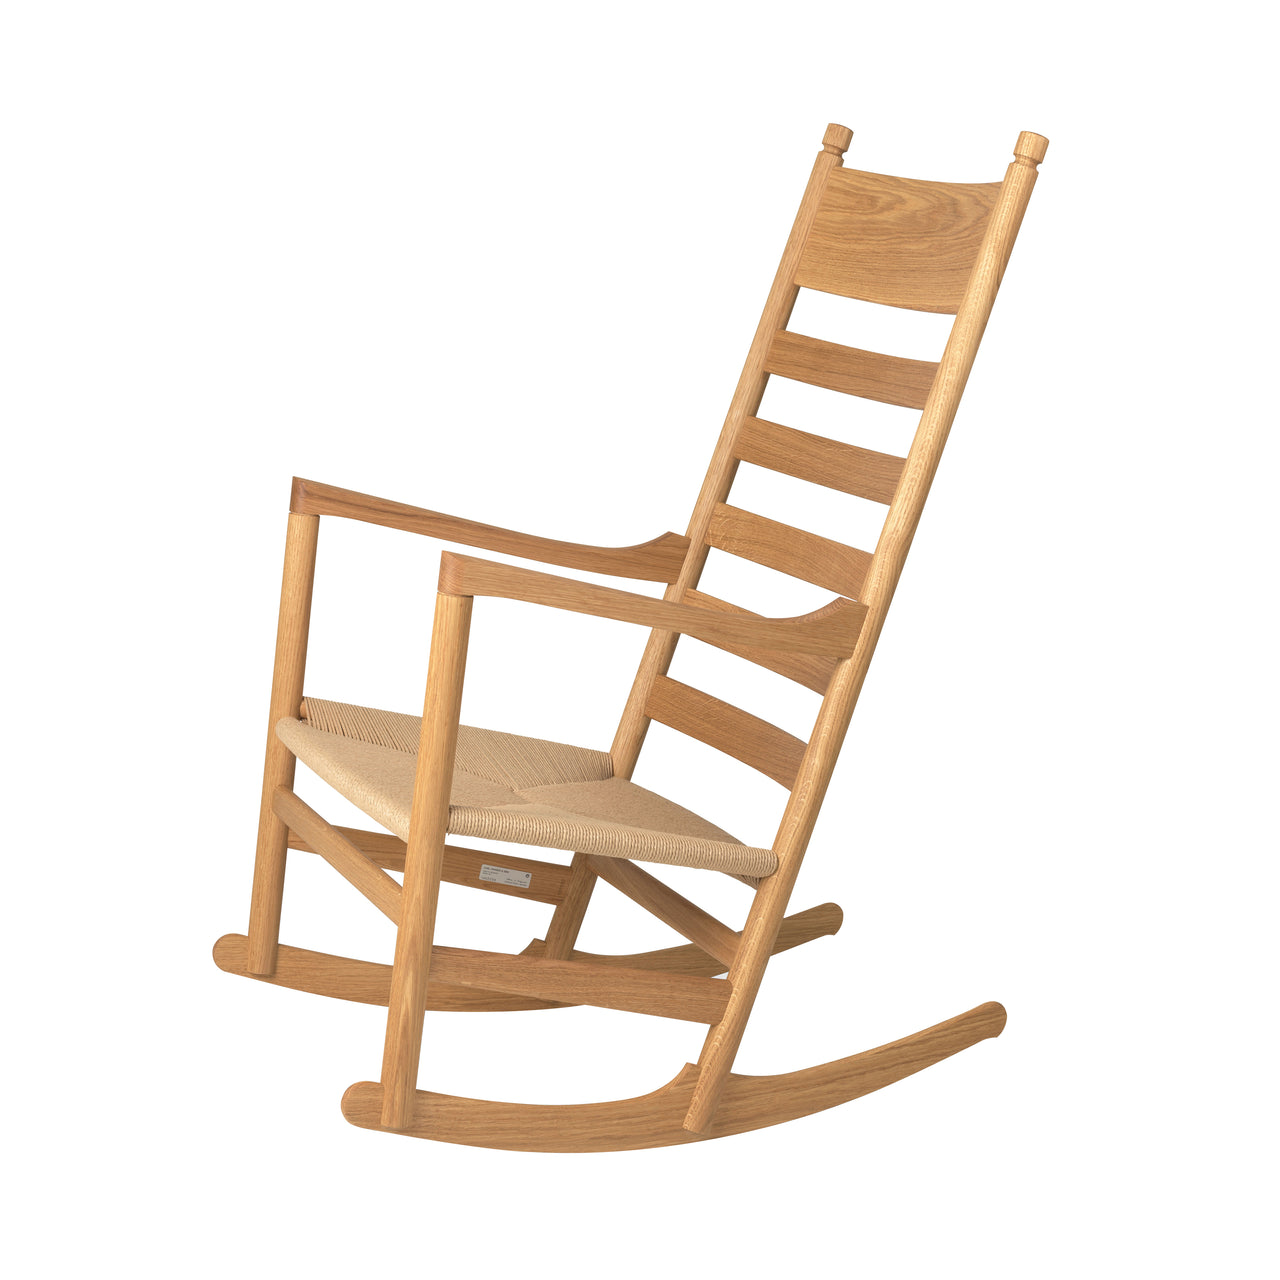 CH45 Rocking Chair: Natural Paper Cord + Oiled Oak